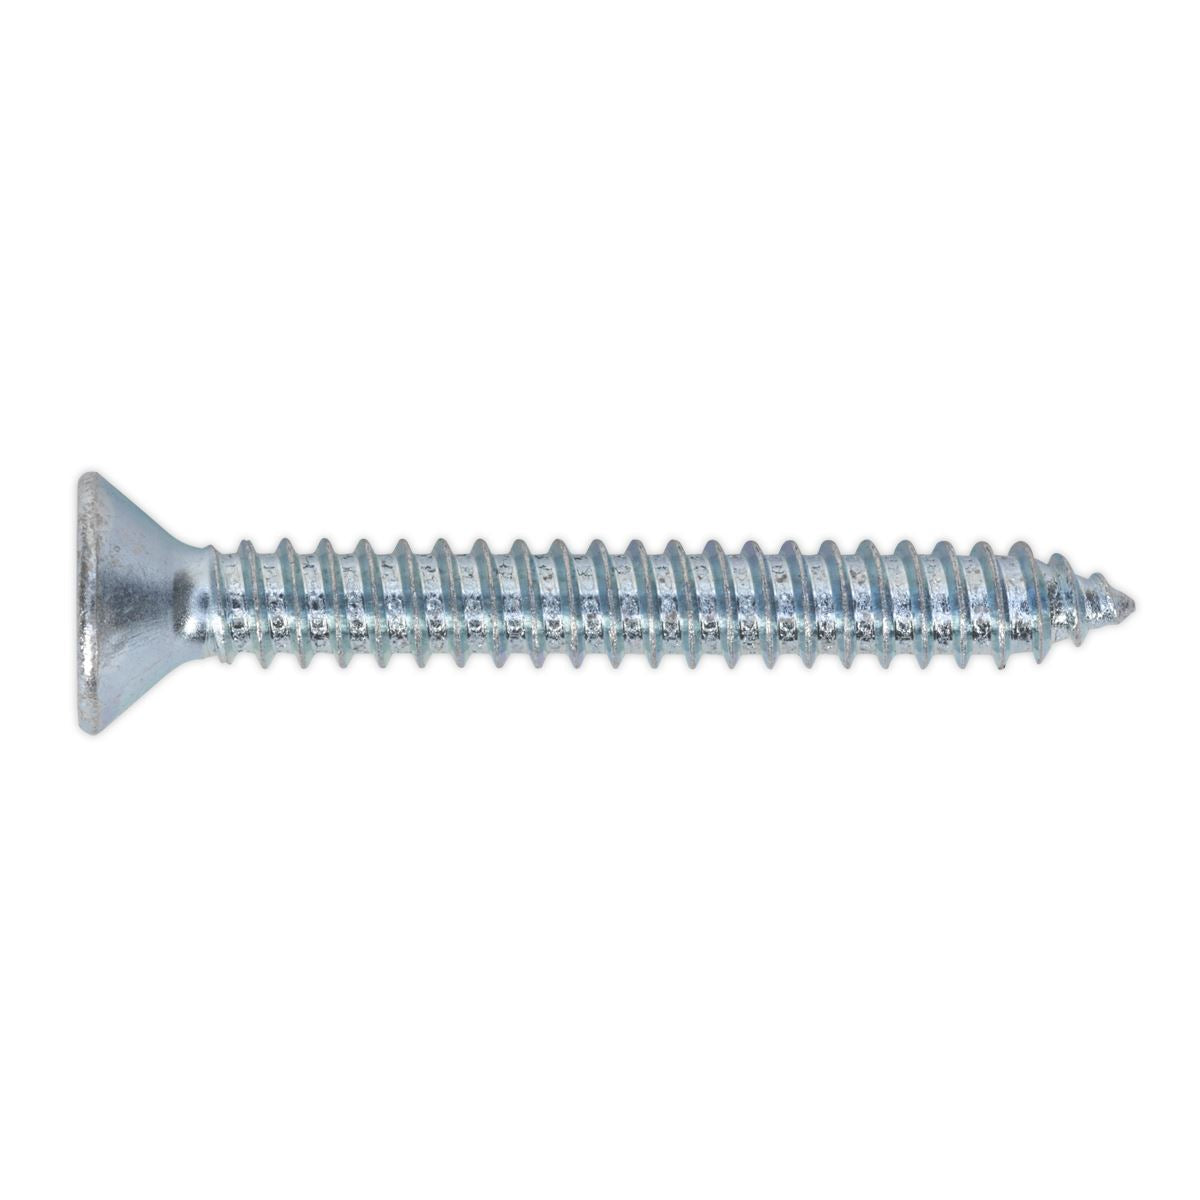 Sealey Self Tapping Screw 6.3 x 51mm Countersunk Pozi Pack of 100